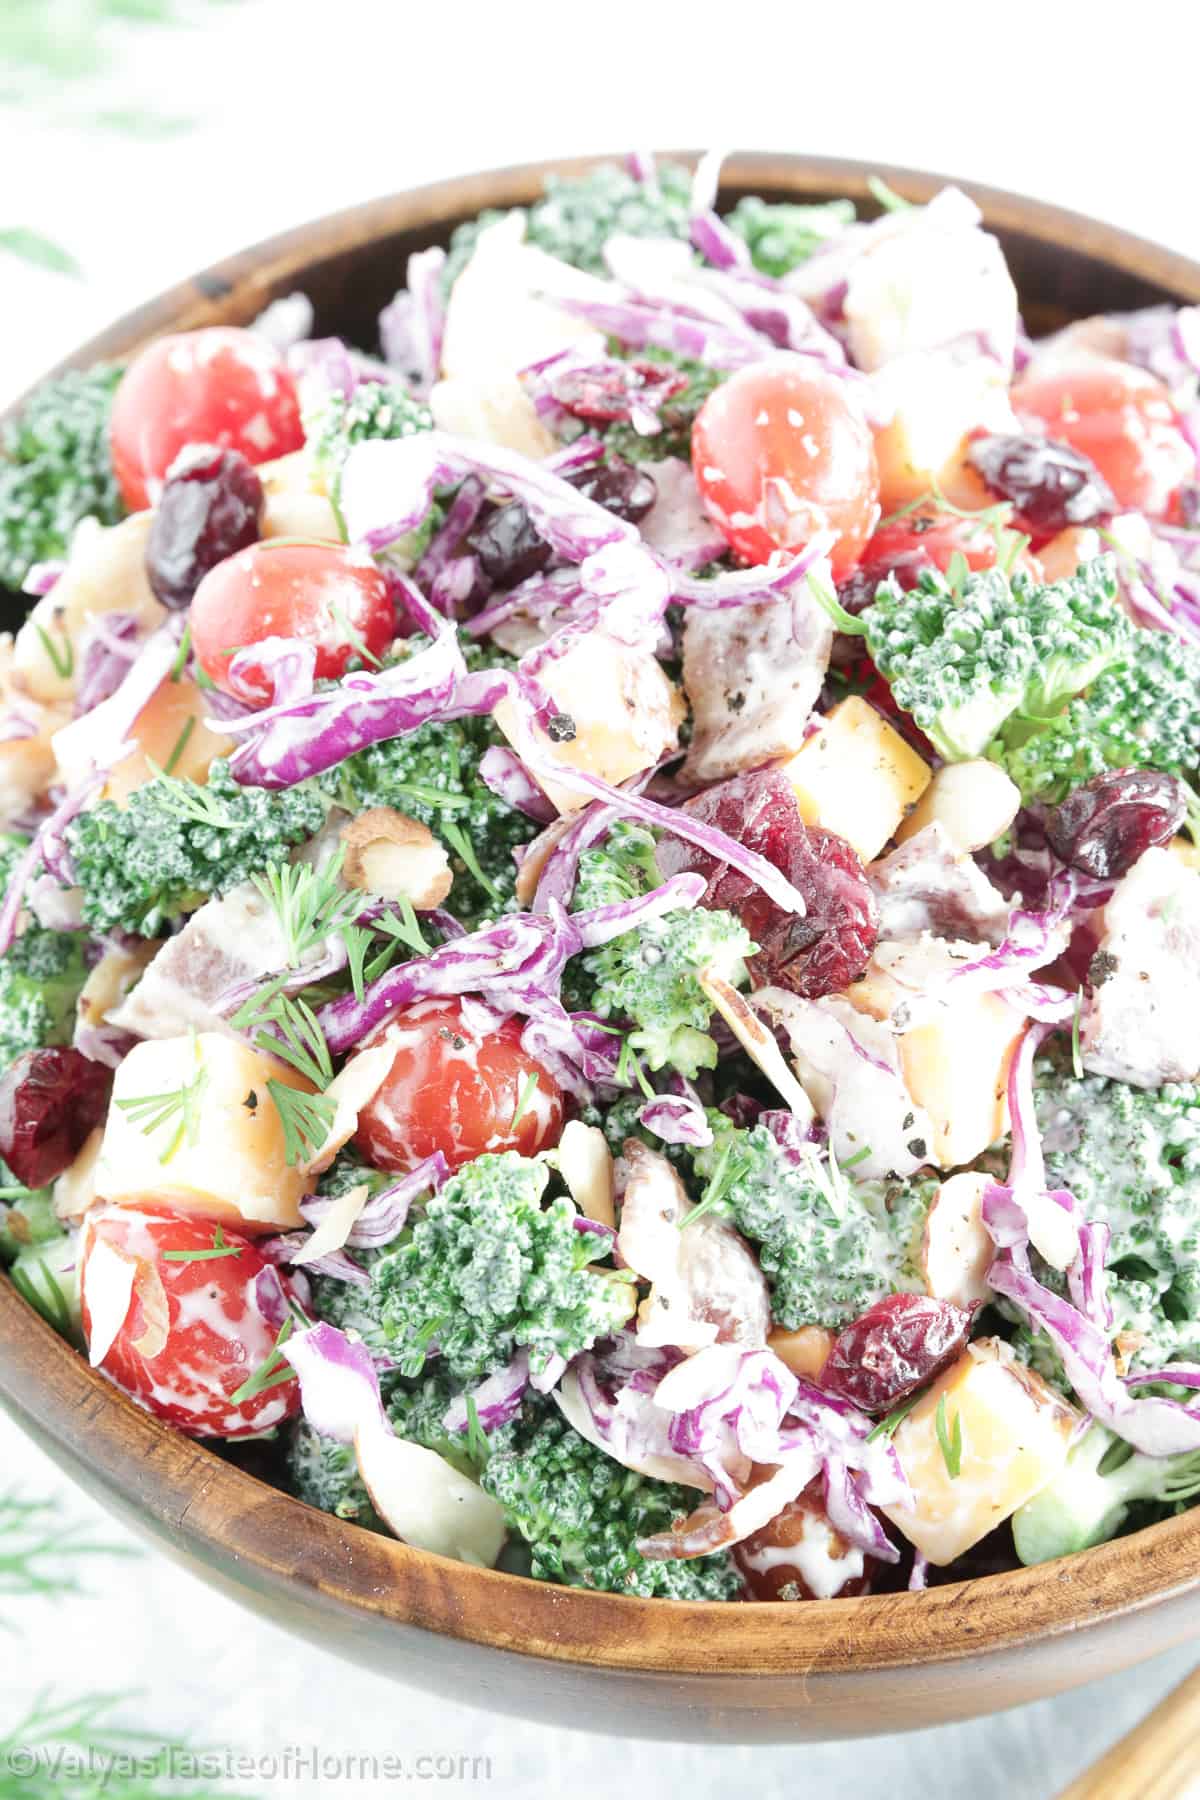 Broccoli Tomato Salad is an ideal dish that celebrates natural ingredients while still being easy enough to whip up within minutes.